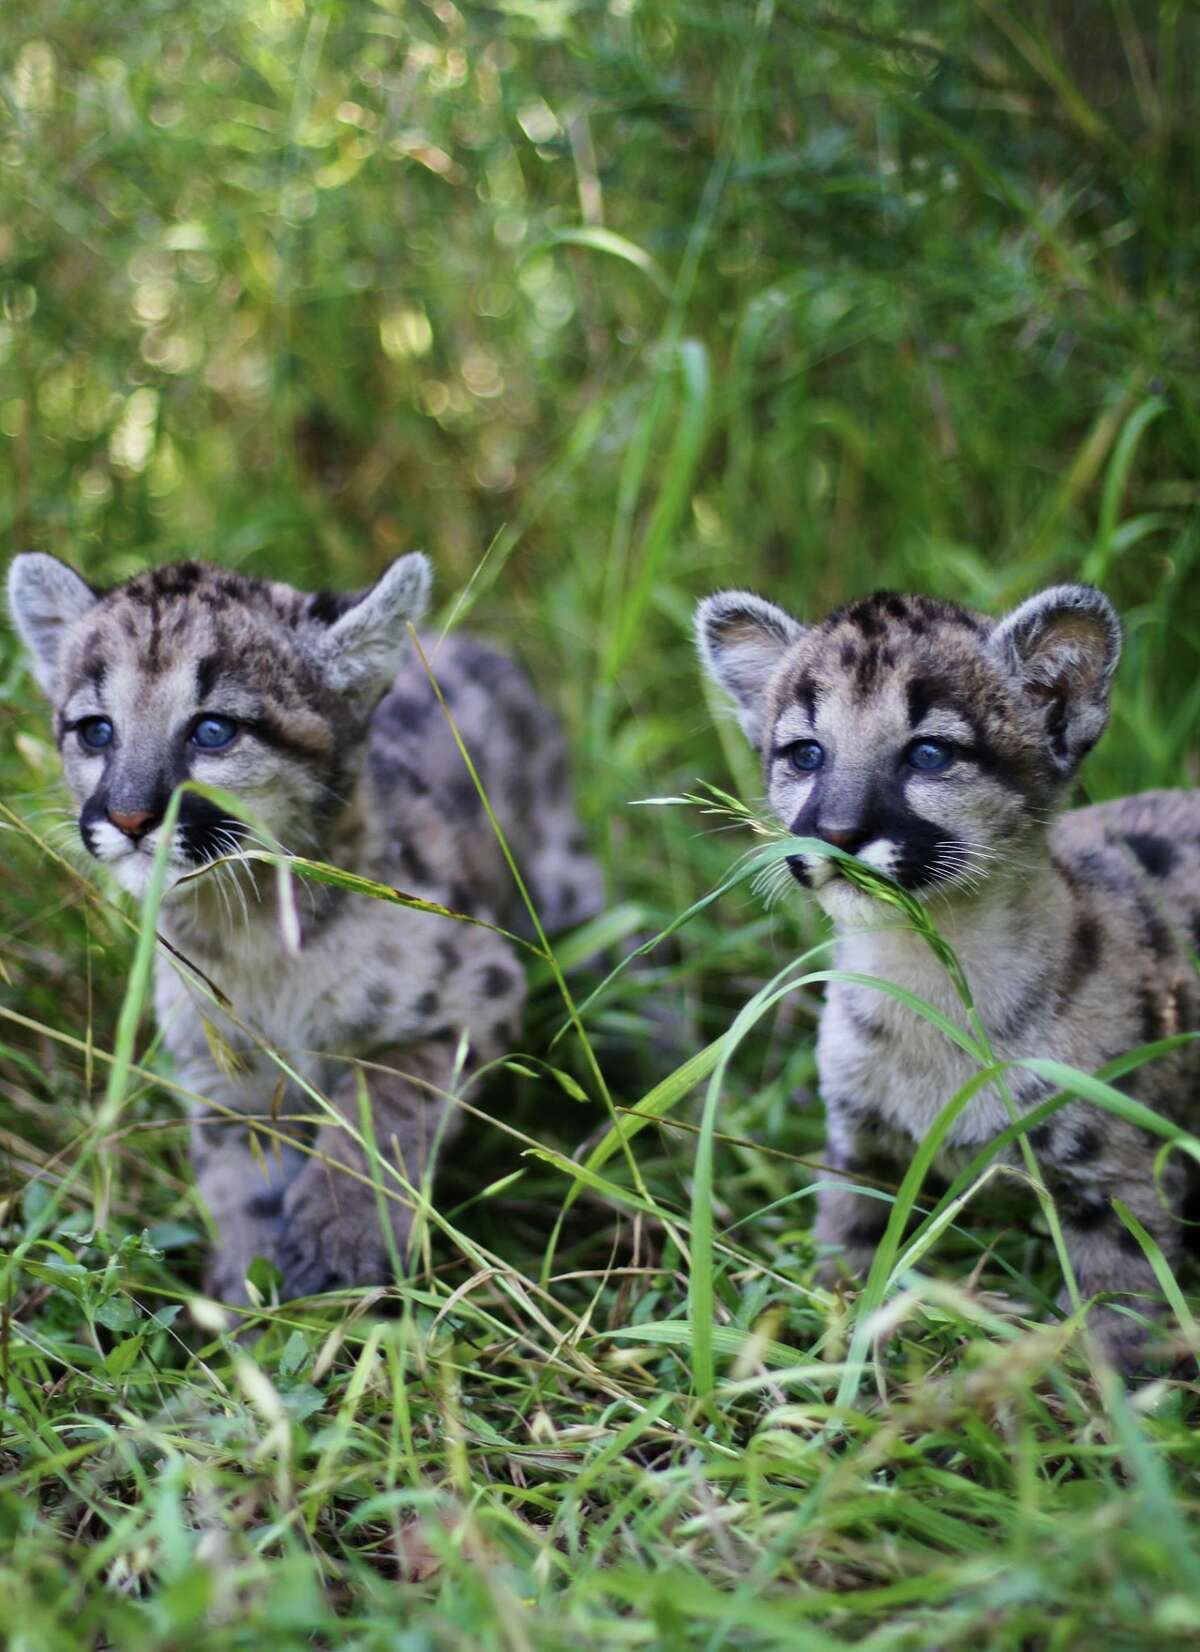 Video: Animal World & Snake Farm Zoo reveals two new baby mountain lions